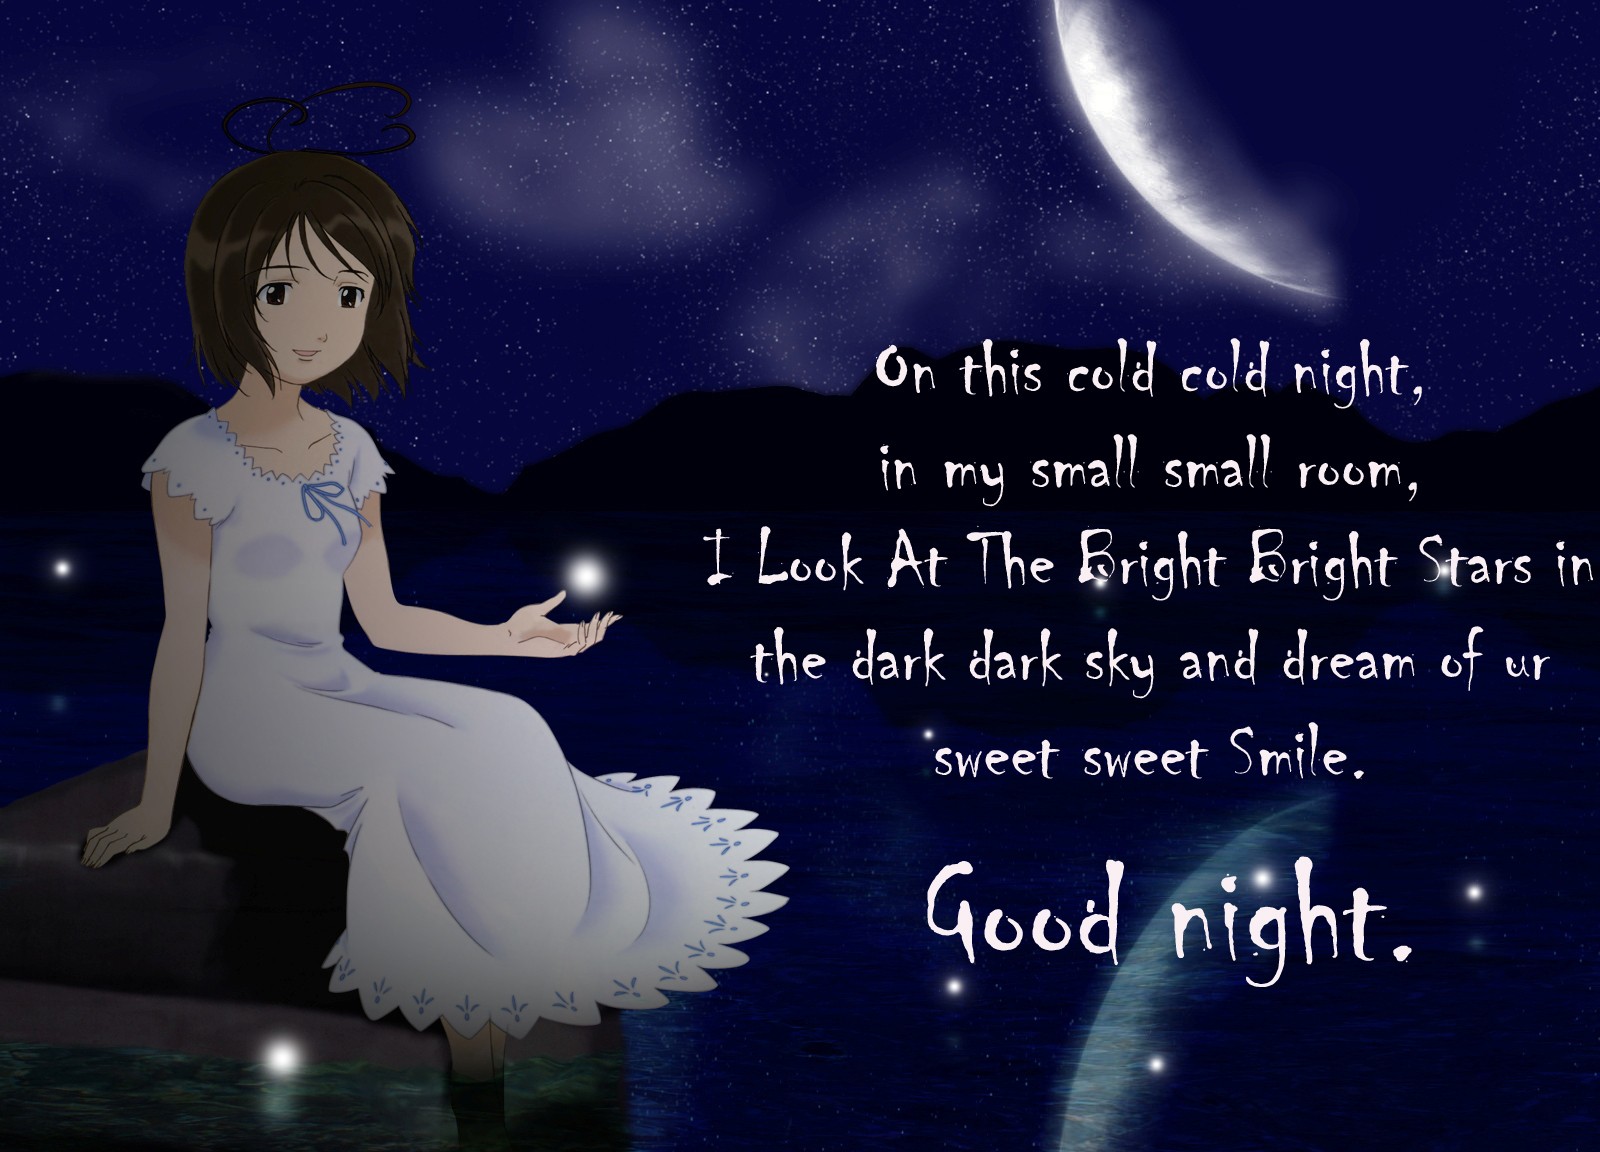 Good Night wishes images - Good Night wishes pic